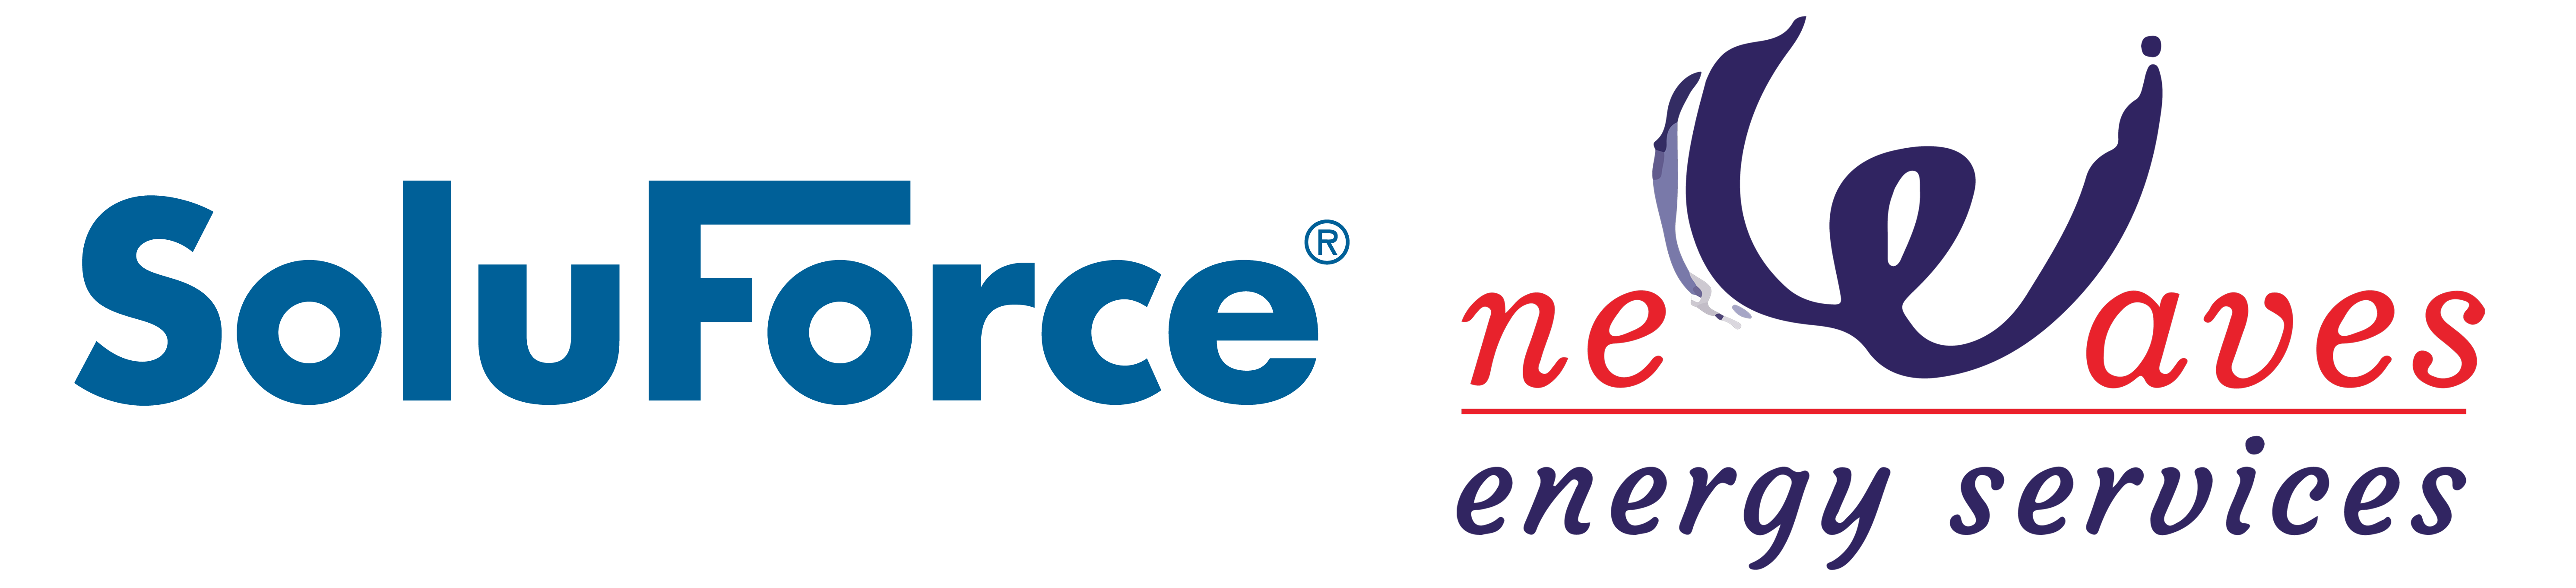 SoluForce / New Waves Energy Services